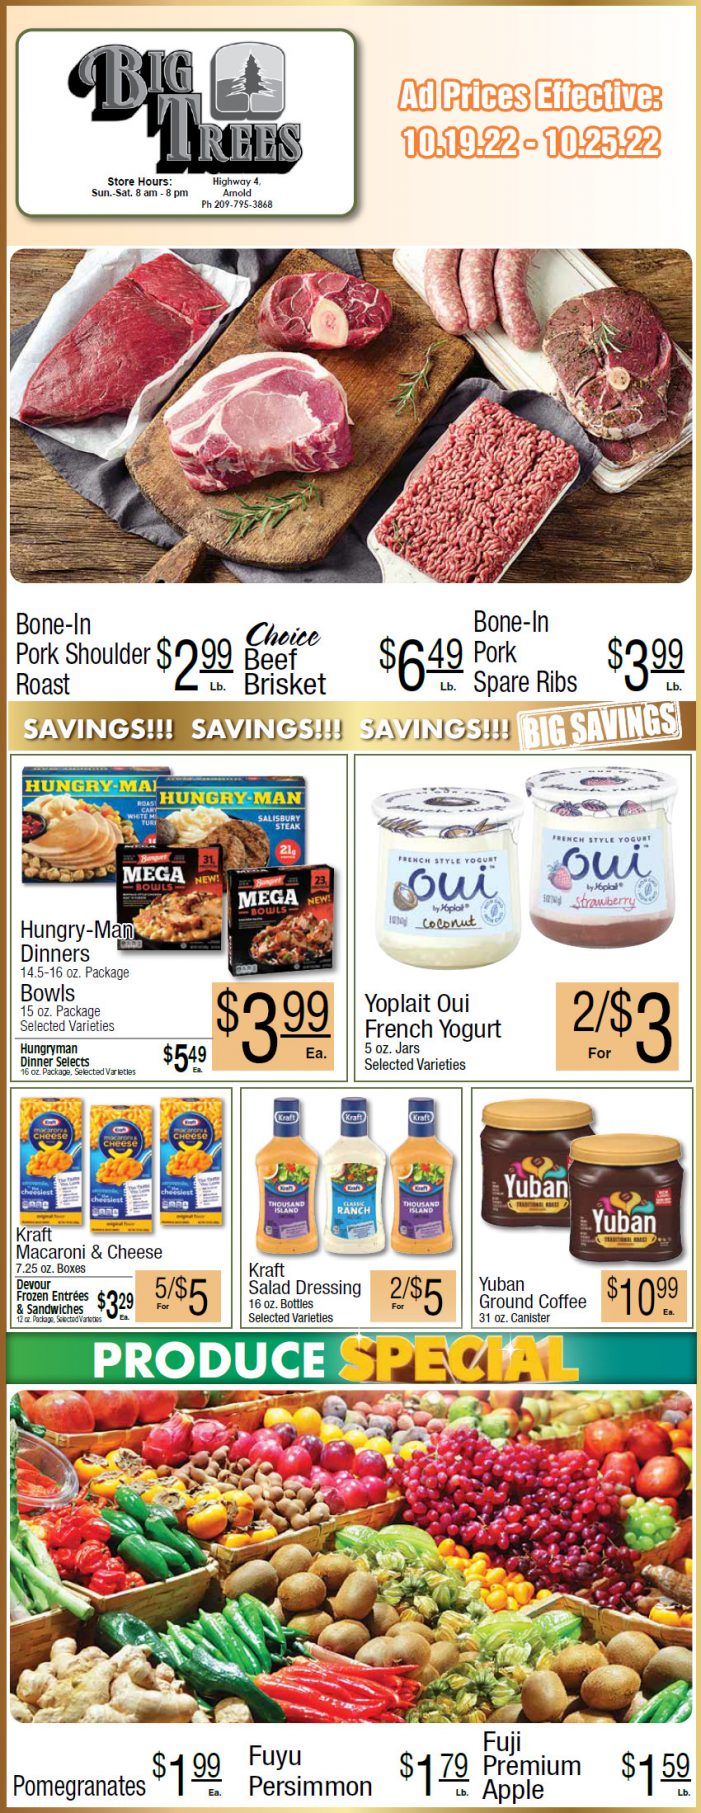 Big Trees Market Weekly Ad & Grocery Specials October Through October 25th!  Shop Local & Save!!